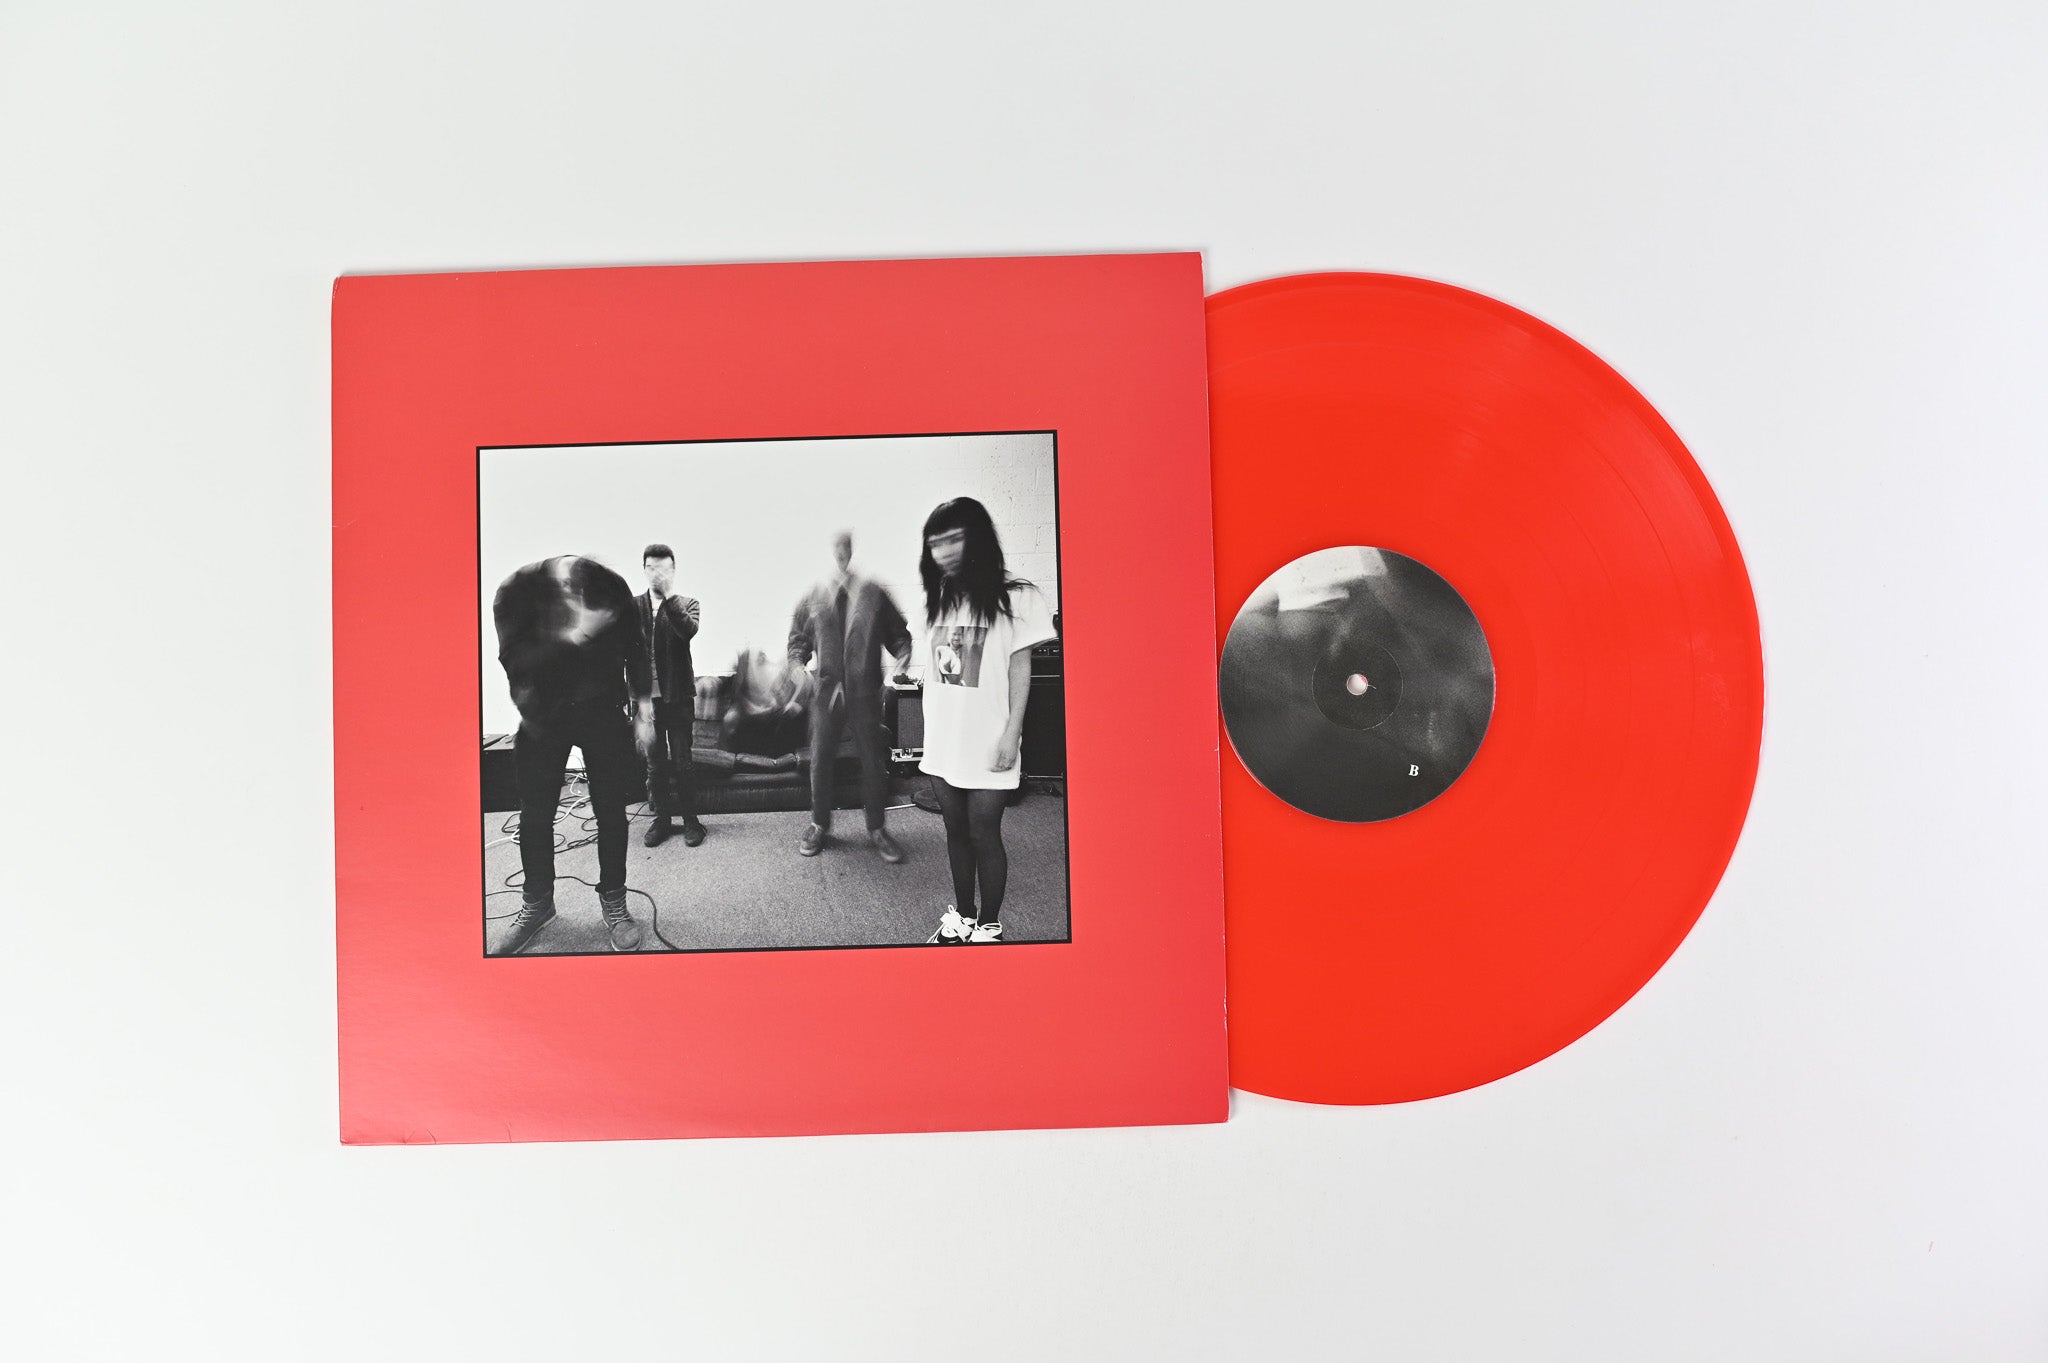 Just Mustard - Wednesday on Pizza Pizza Red Vinyl Repress